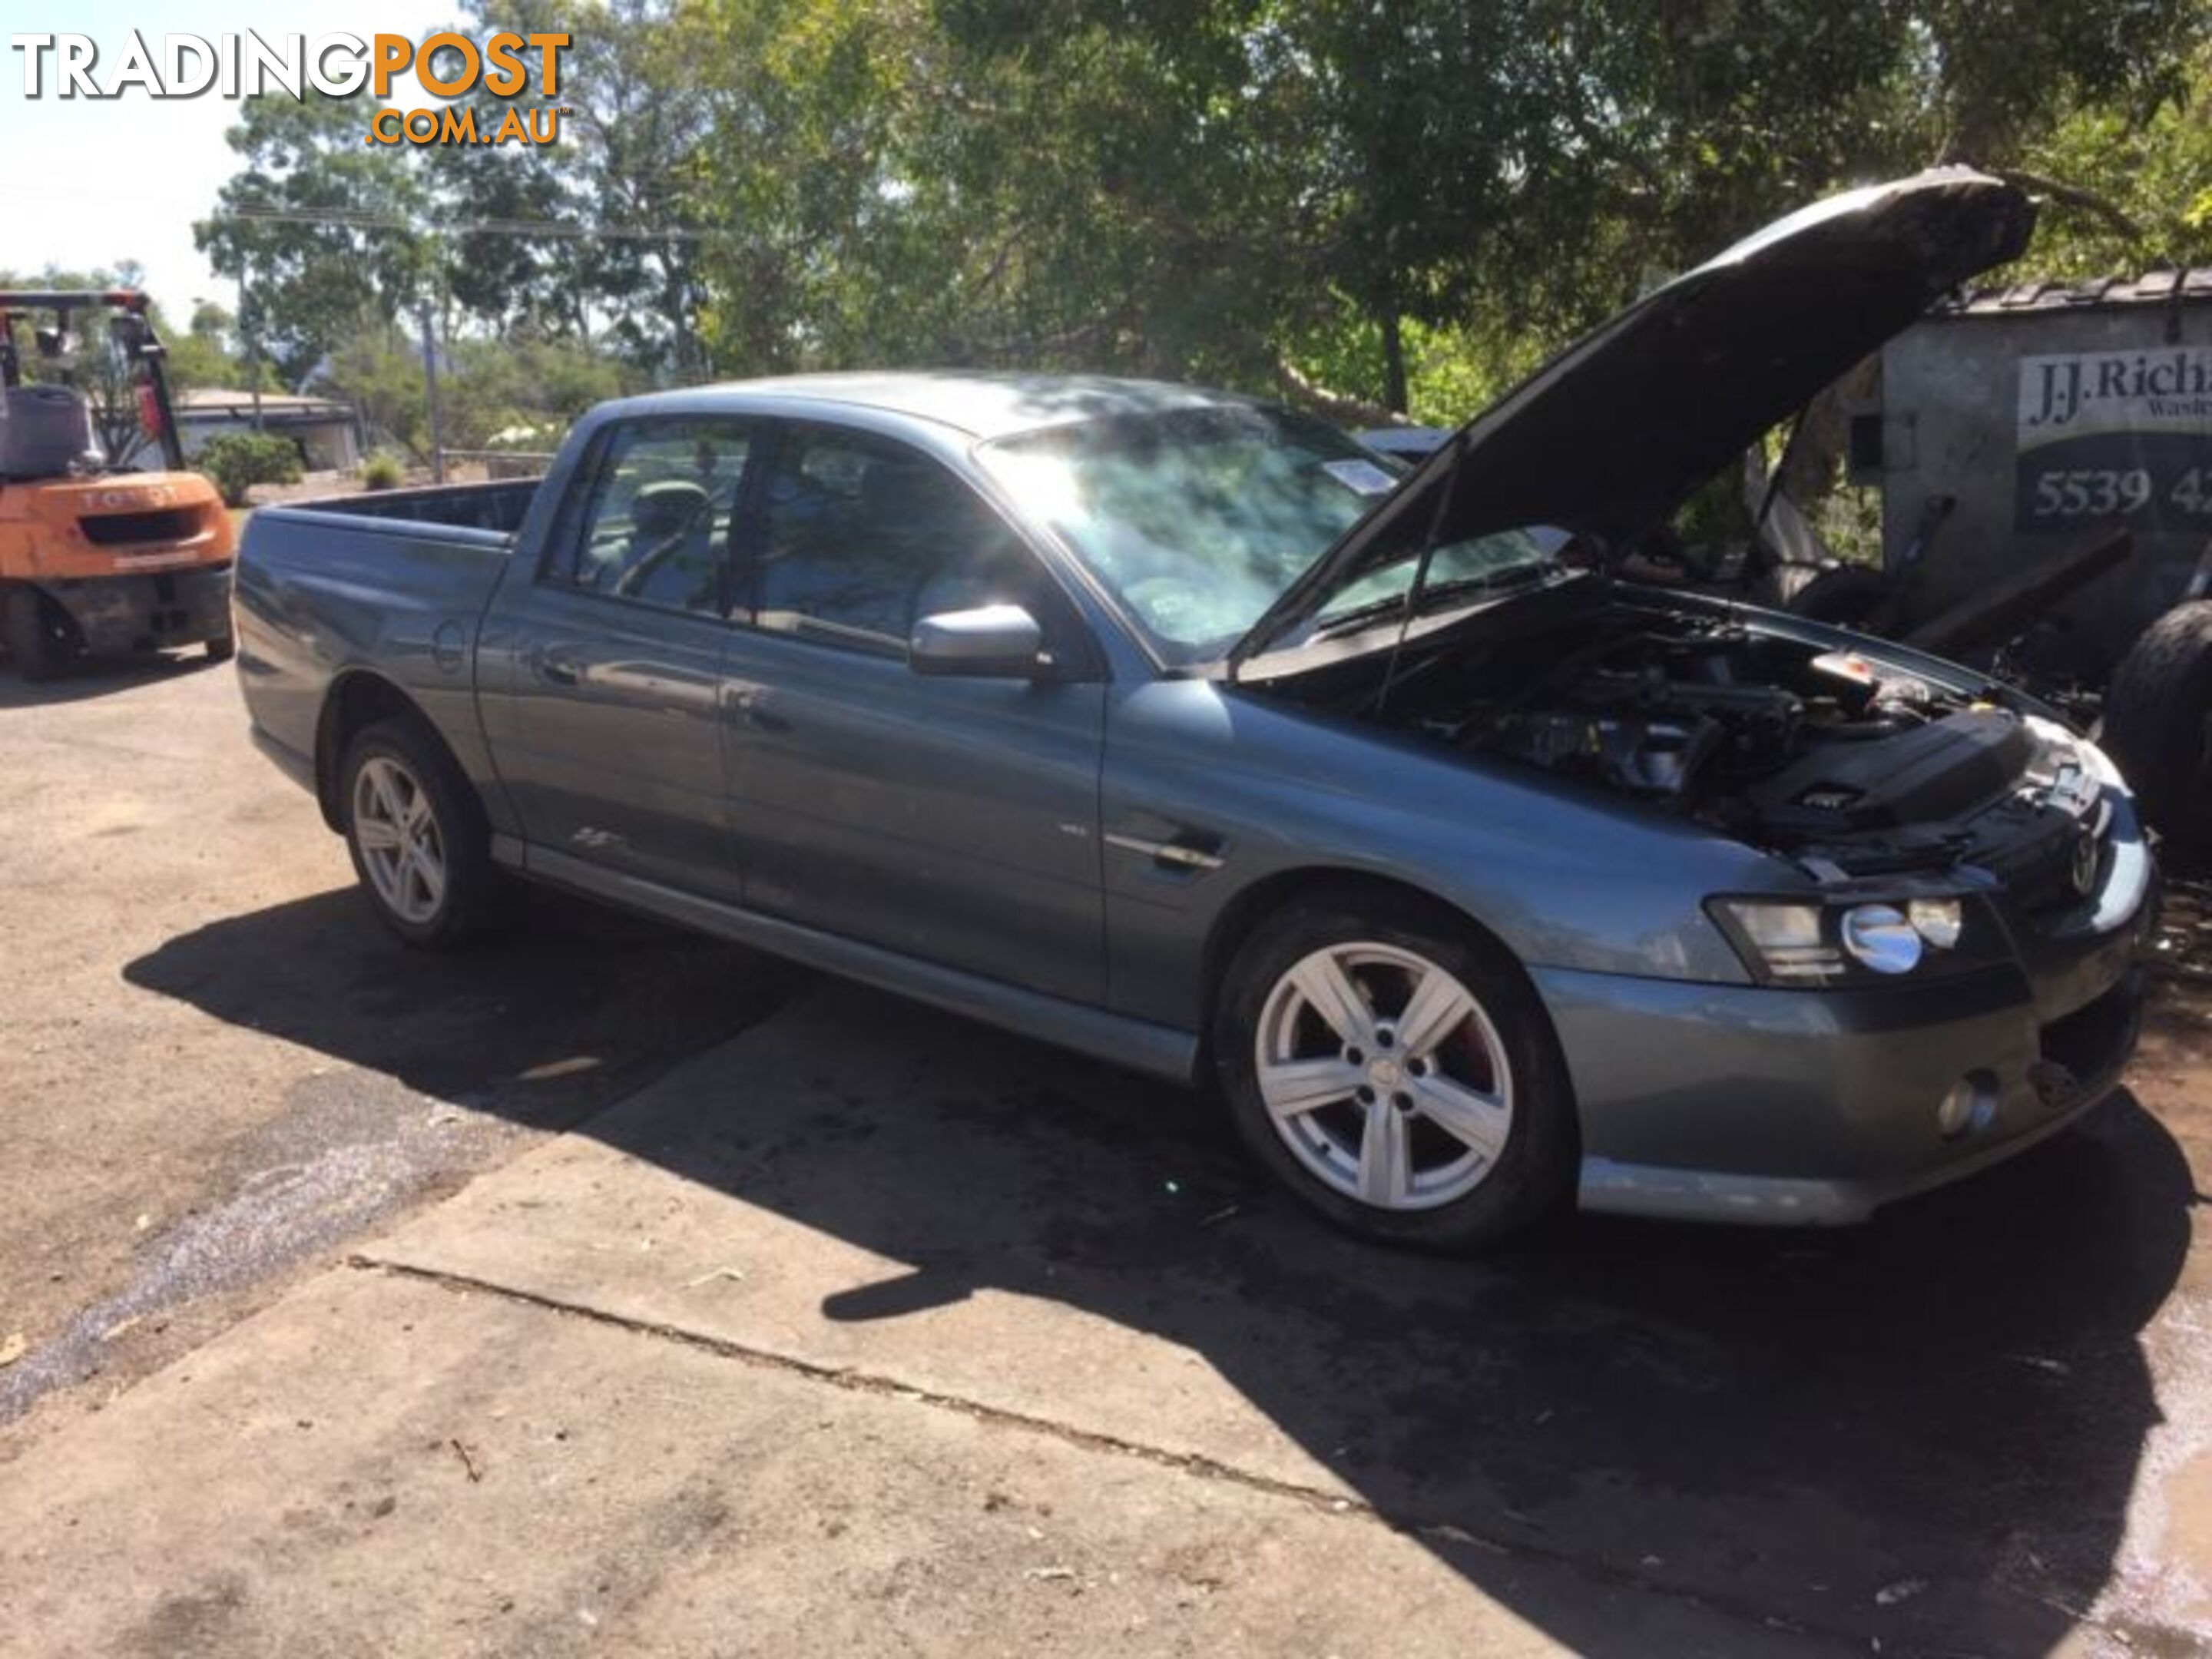 Wrecking 2005 Holden Commodore crewman SS V8 Manual